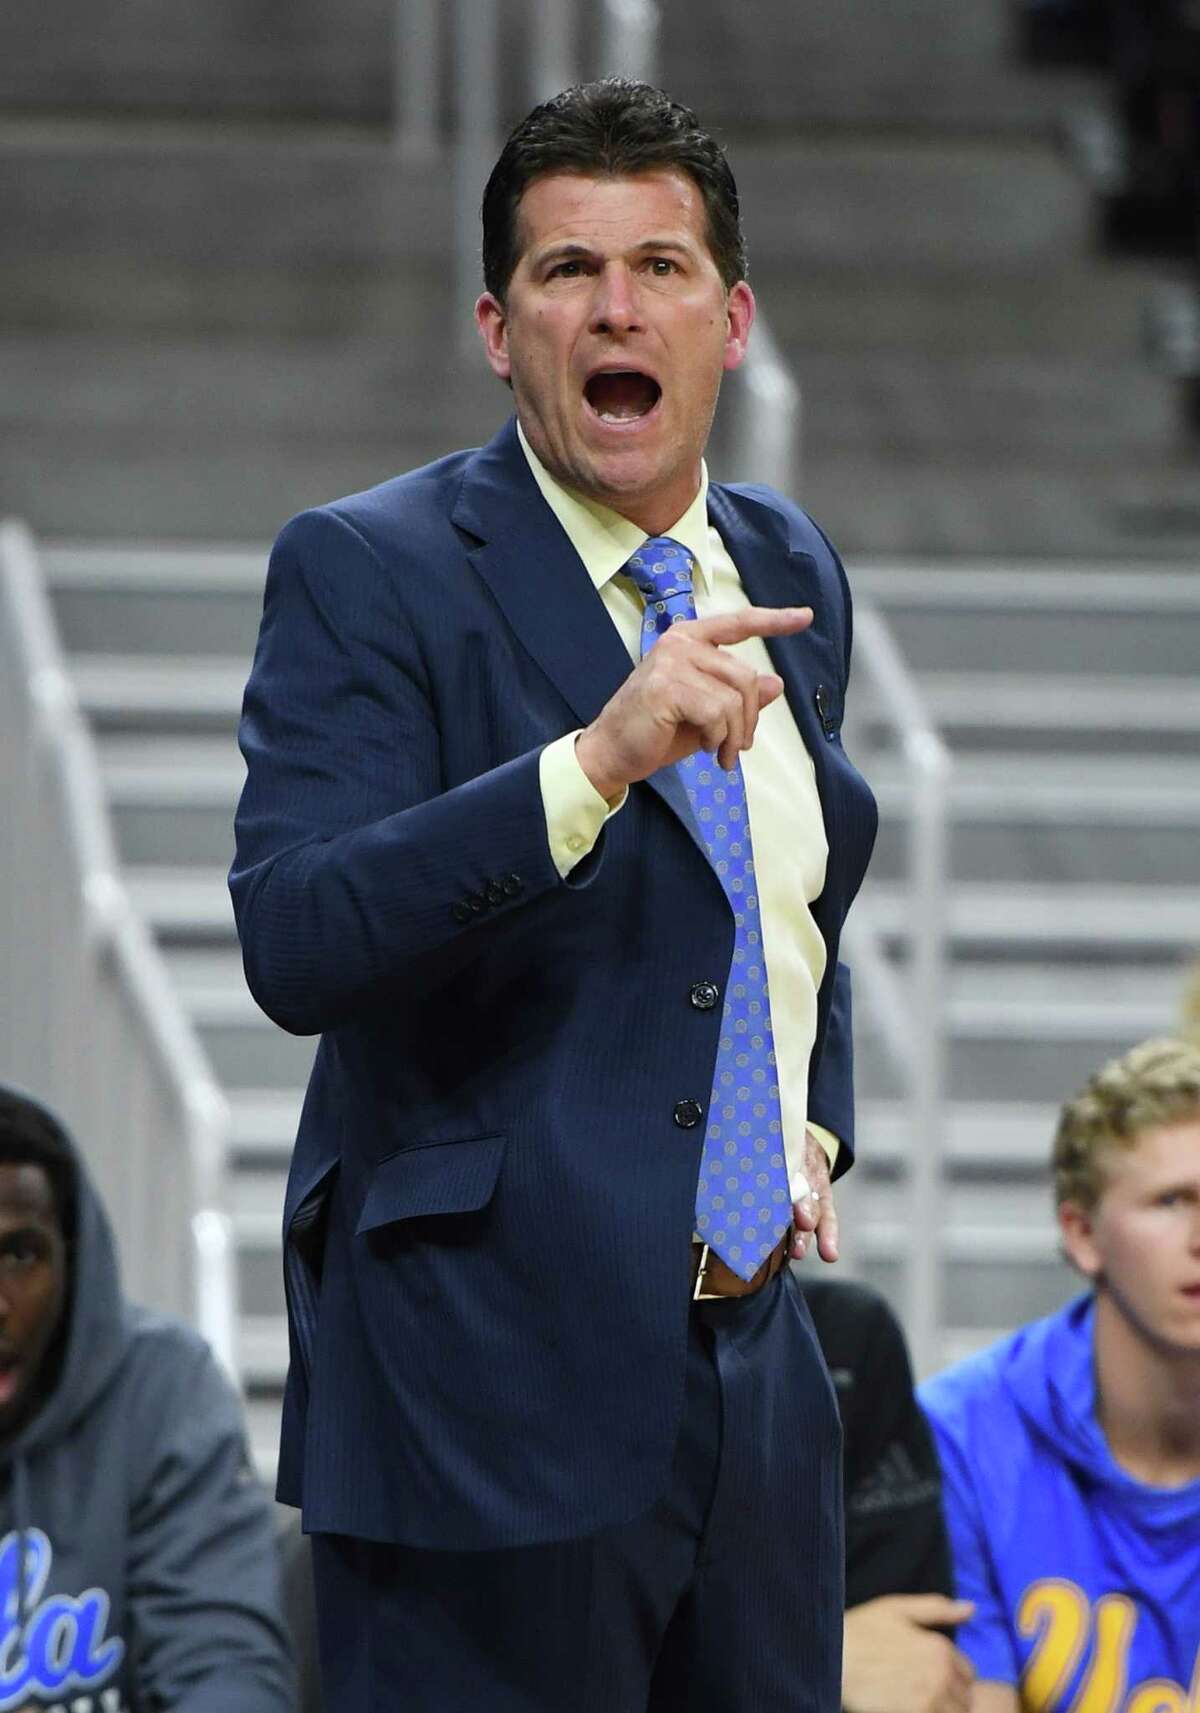 LAS VEGAS, NV - MARCH 10: Head coach Steve Alford of the UCLA Bruins reacts during a semifinal game of the Pac-12 Basketball Tournament against the Arizona Wildcats at T-Mobile Arena on March 10, 2017 in Las Vegas, Nevada. Arizona won 86-75.